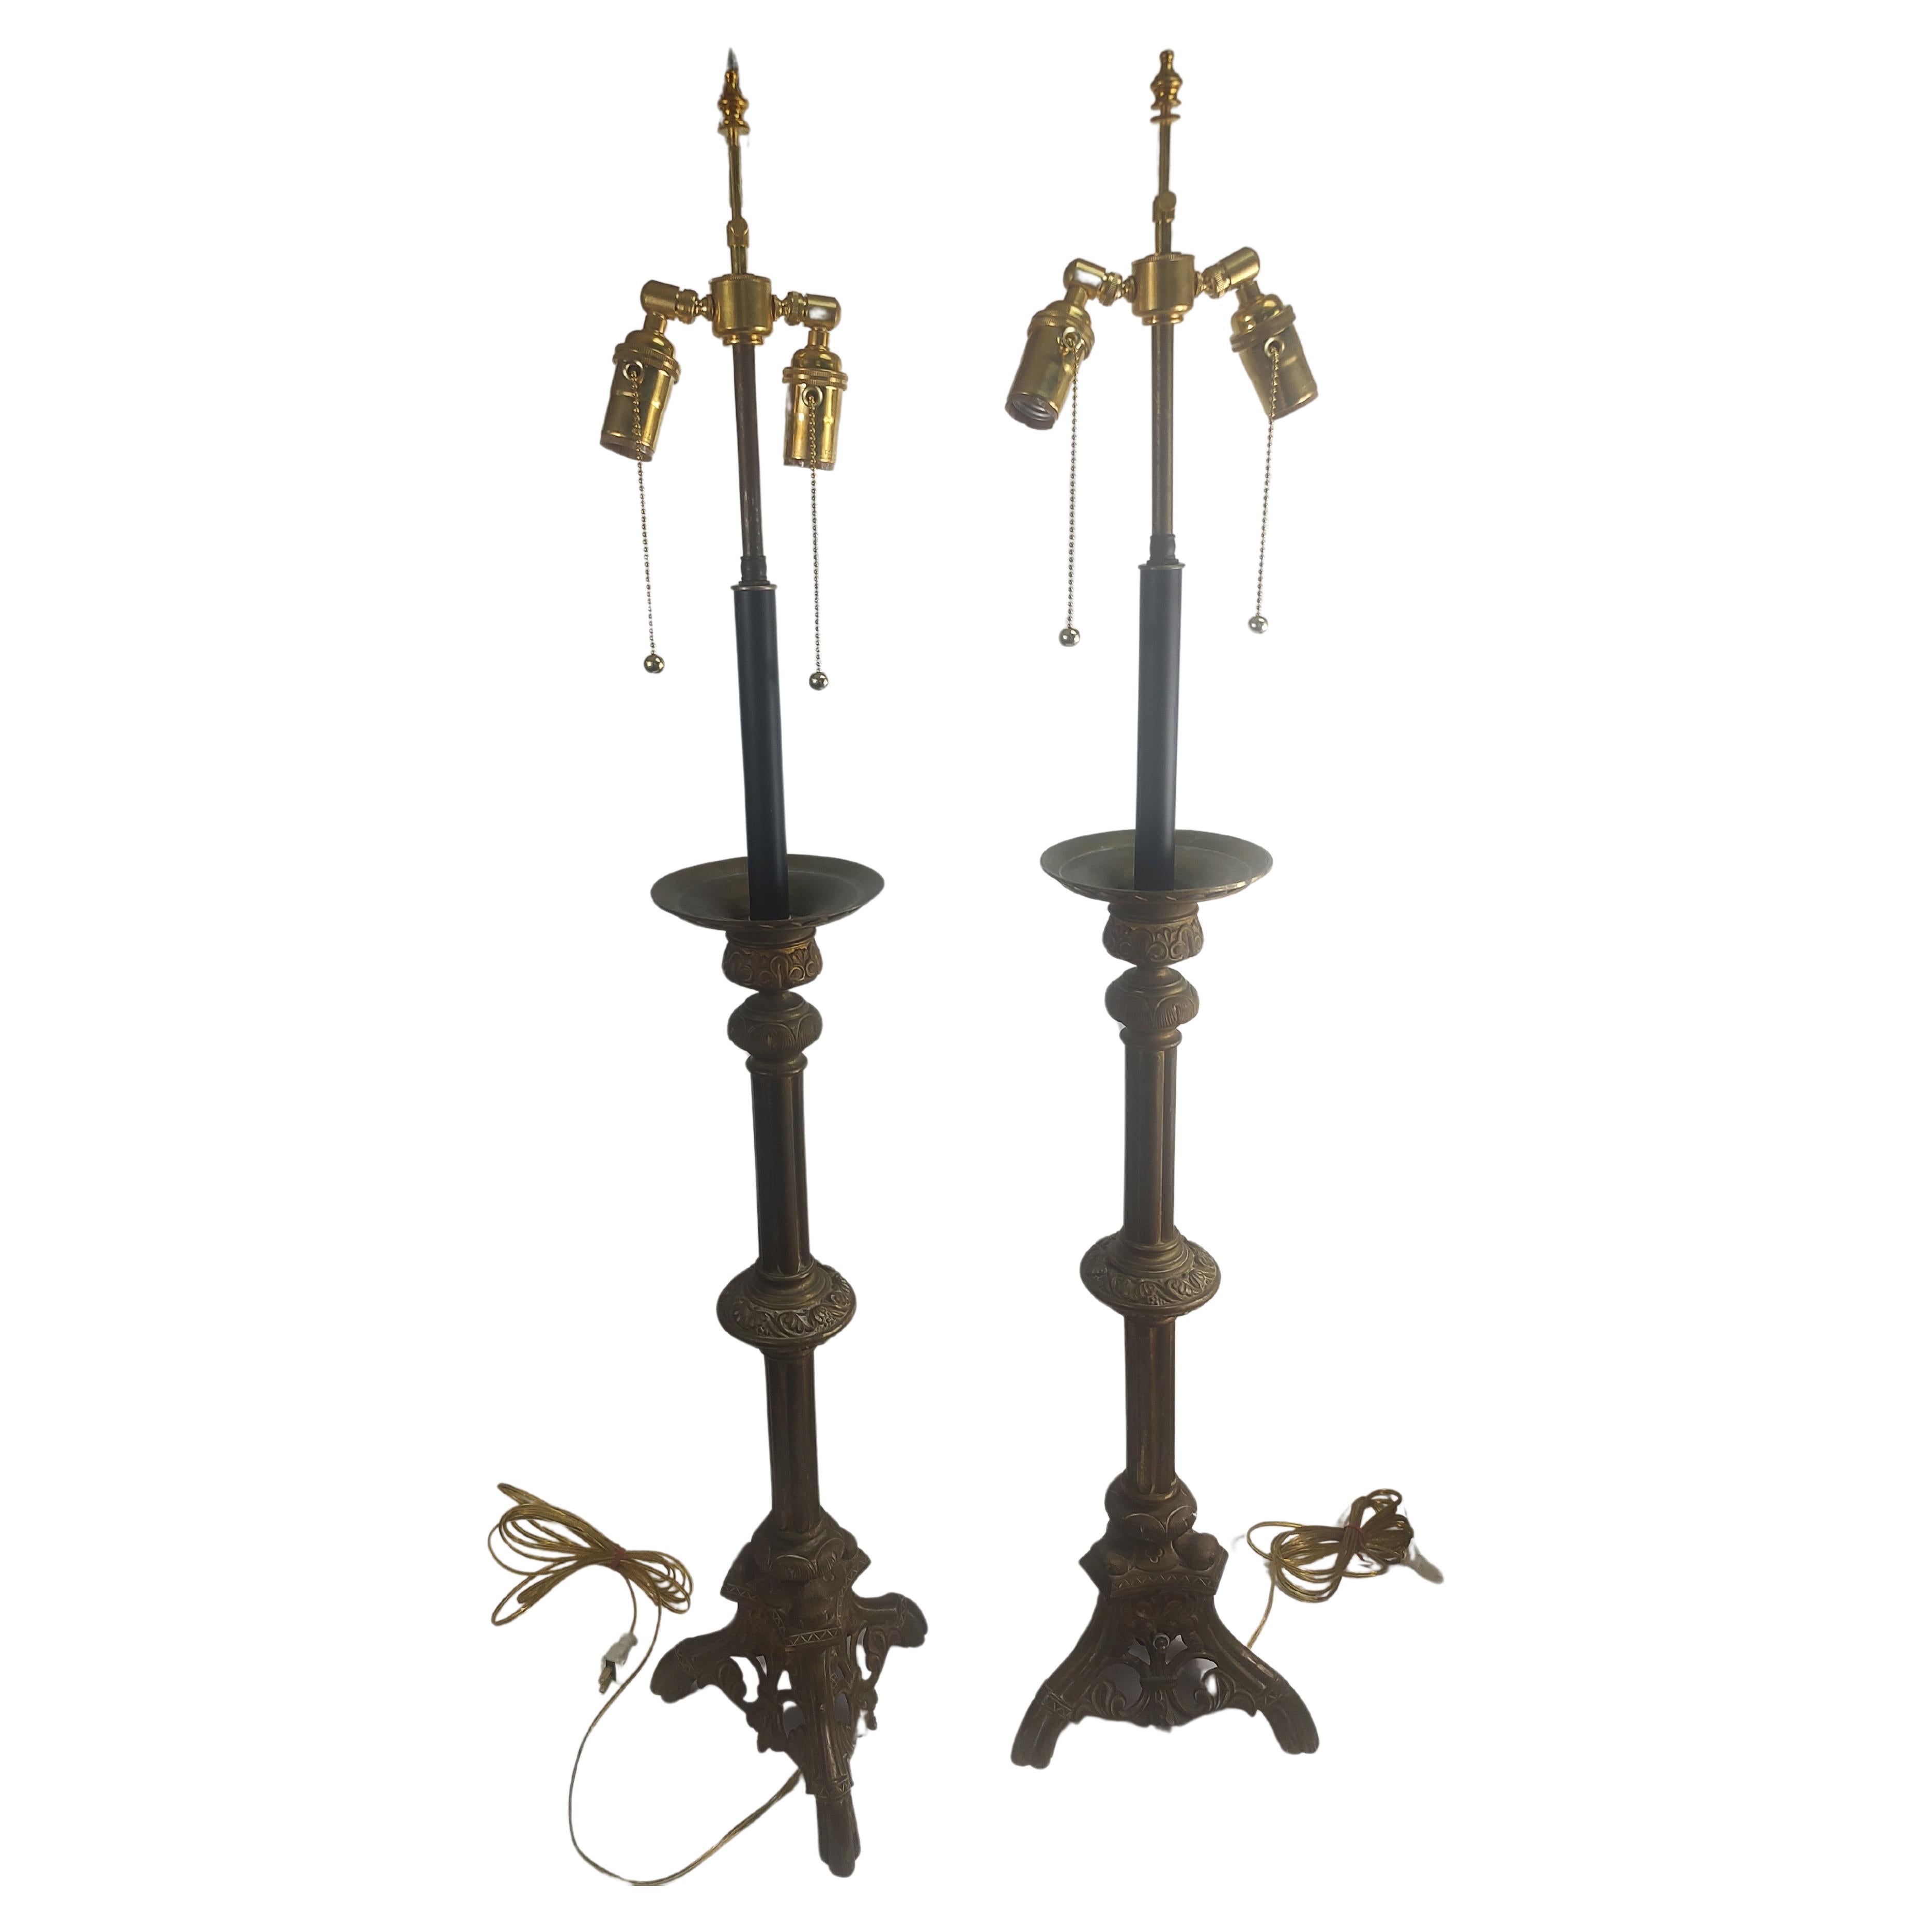 Pair of Solid Brass Ecclesiastical Candlesticks Lamped C1910